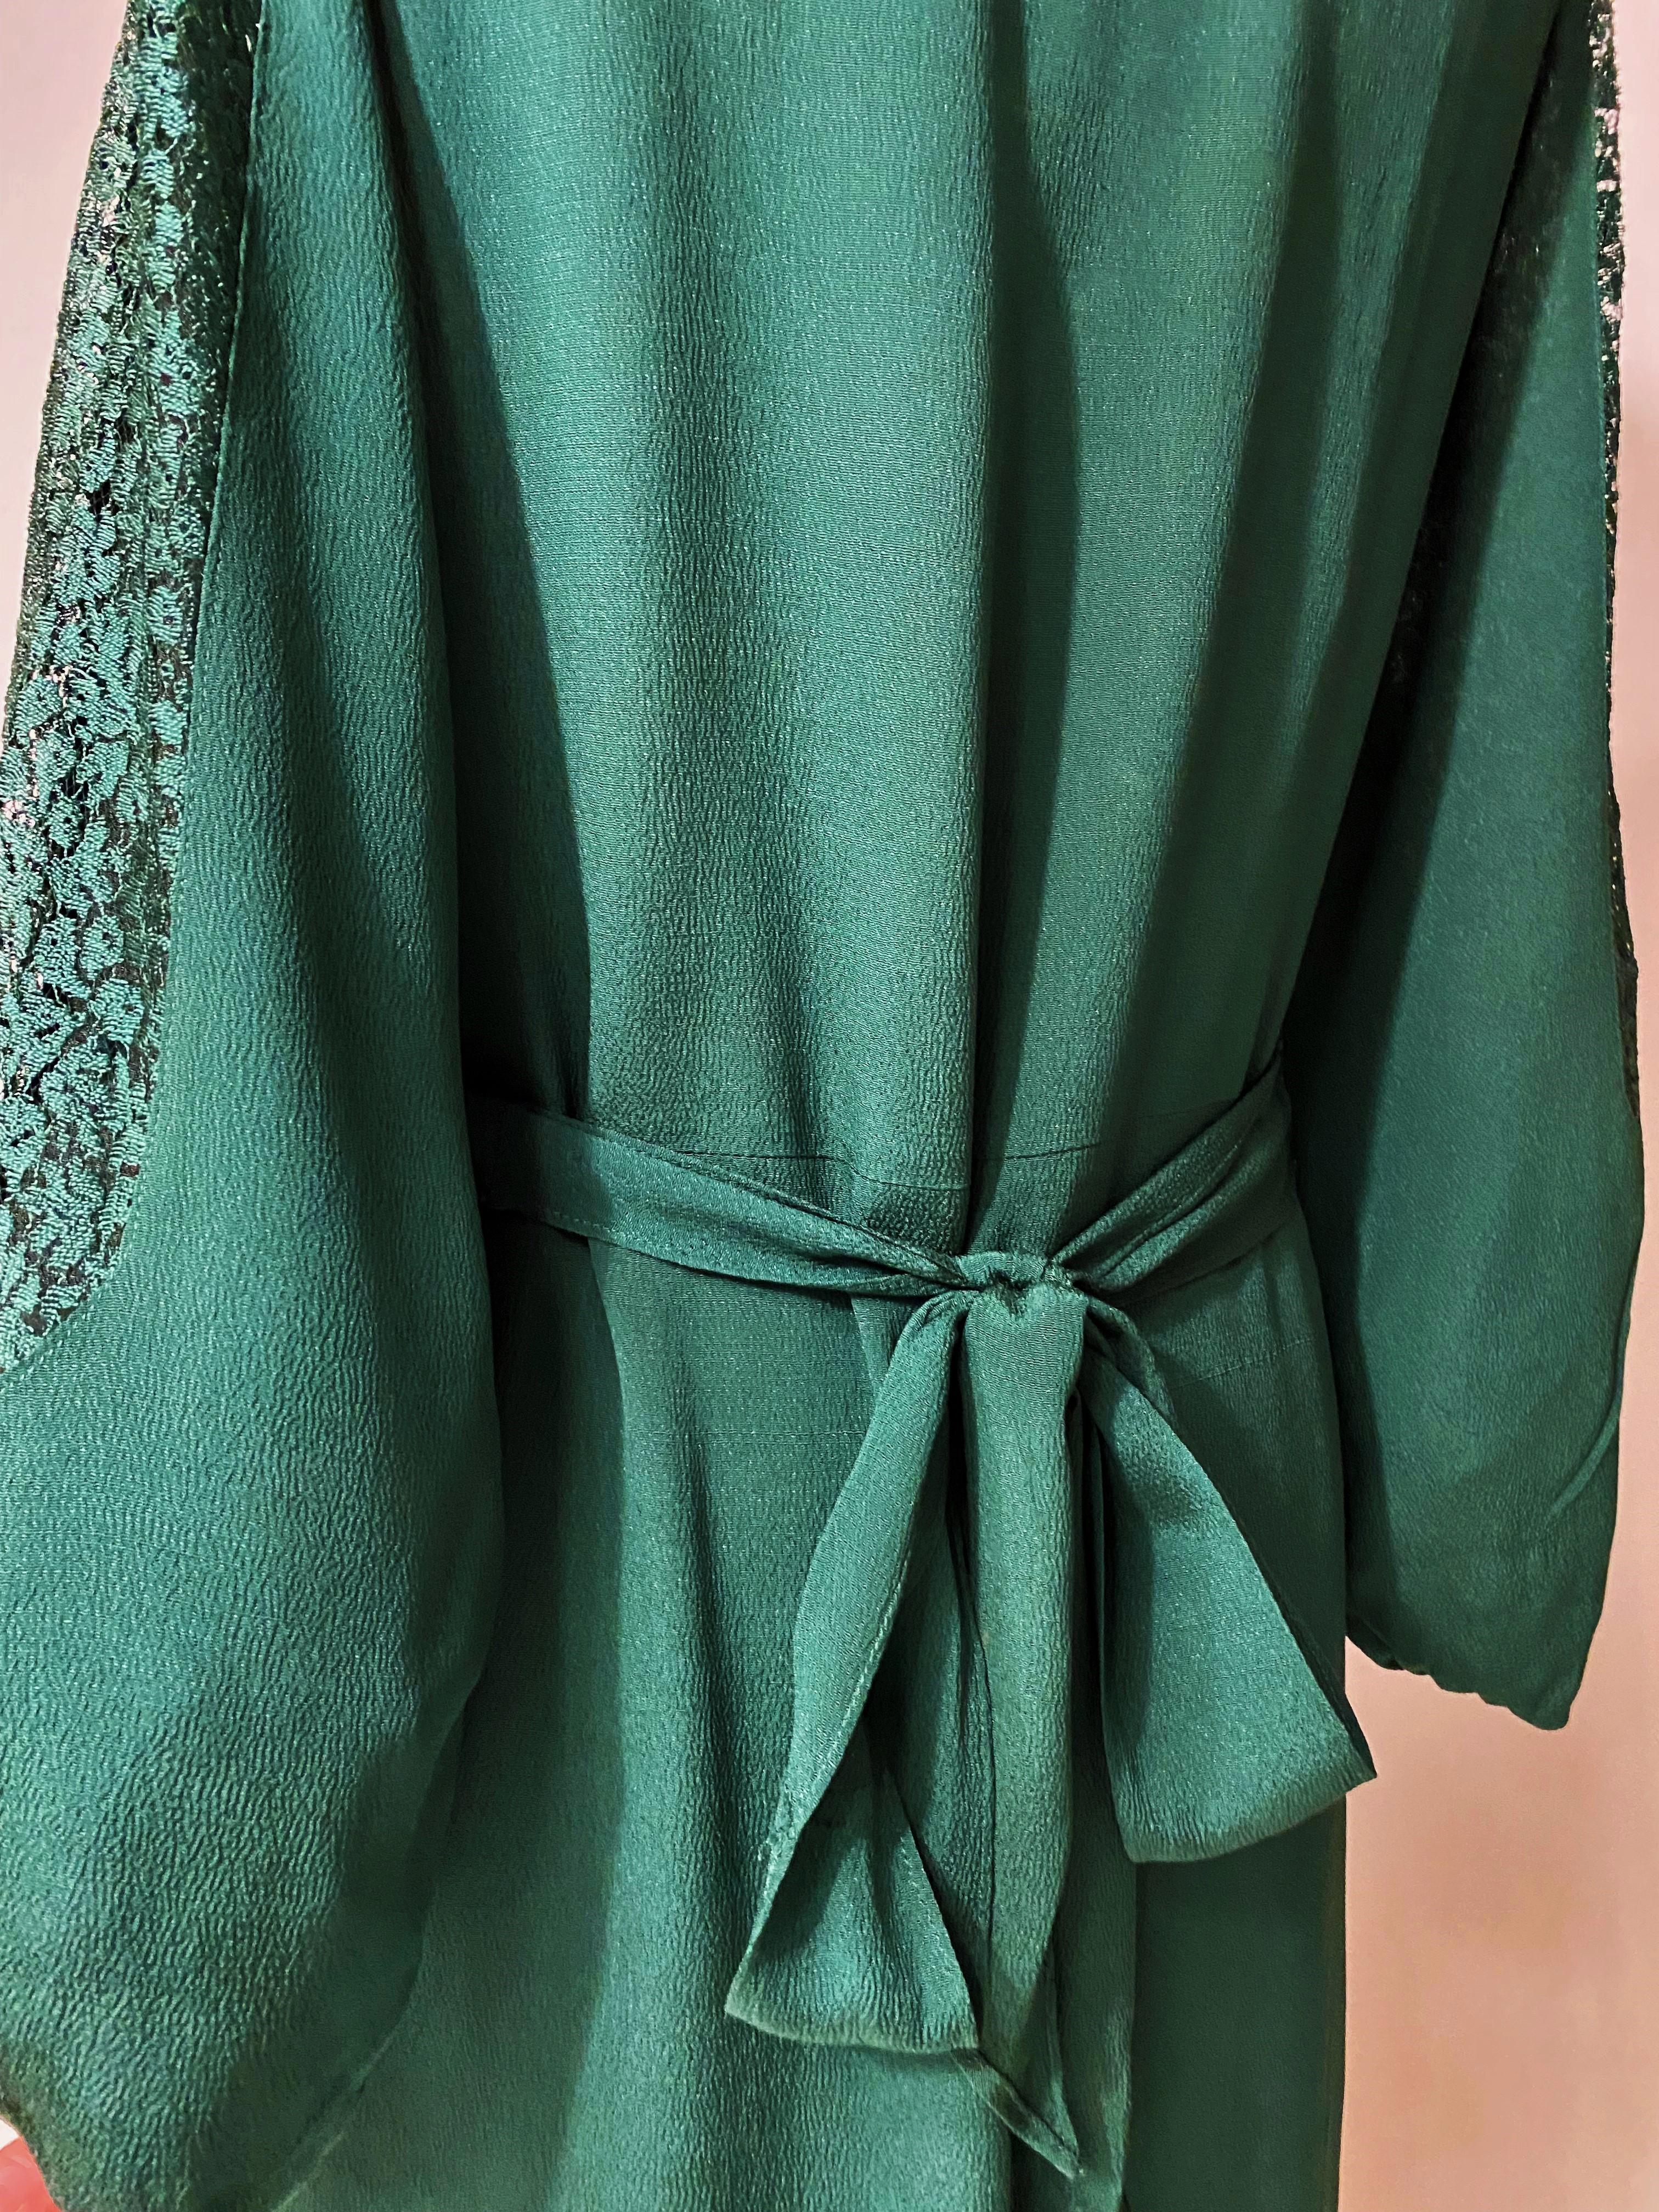 An Emerald green crepe and lace evening dress- France Circa 1940 For Sale 6